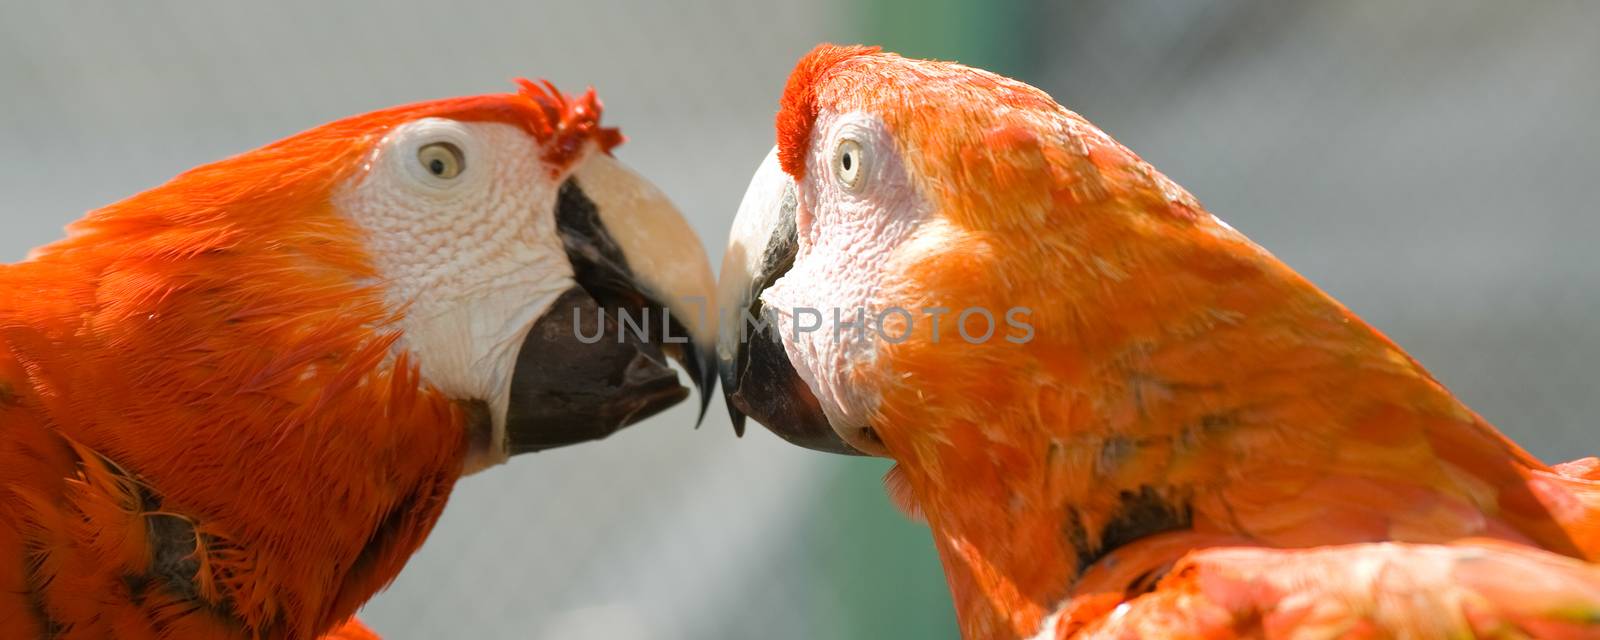 Pair of macaws by CelsoDiniz